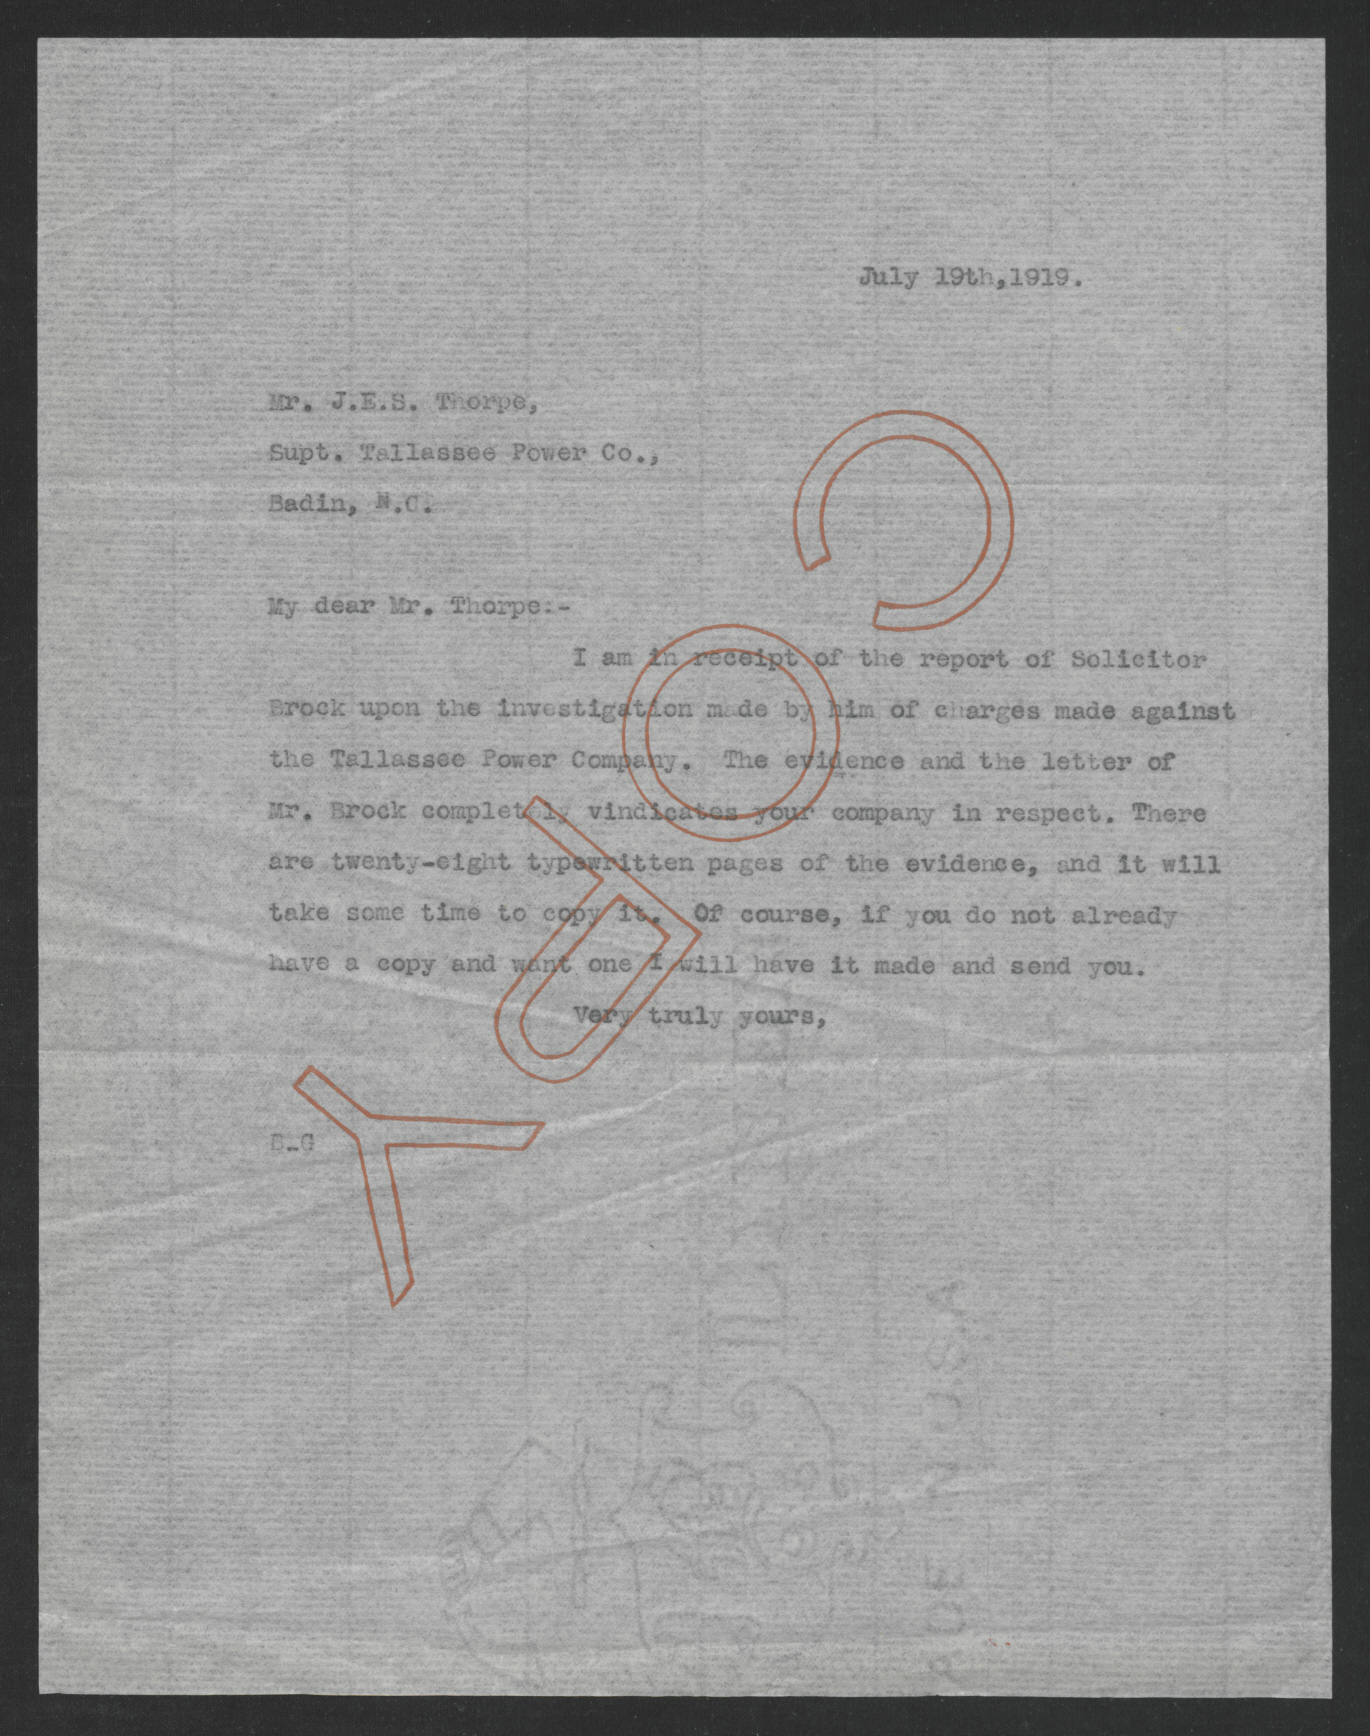 Letter from Thomas W. Bickett to John E. S. Thorpe, July 19, 1919